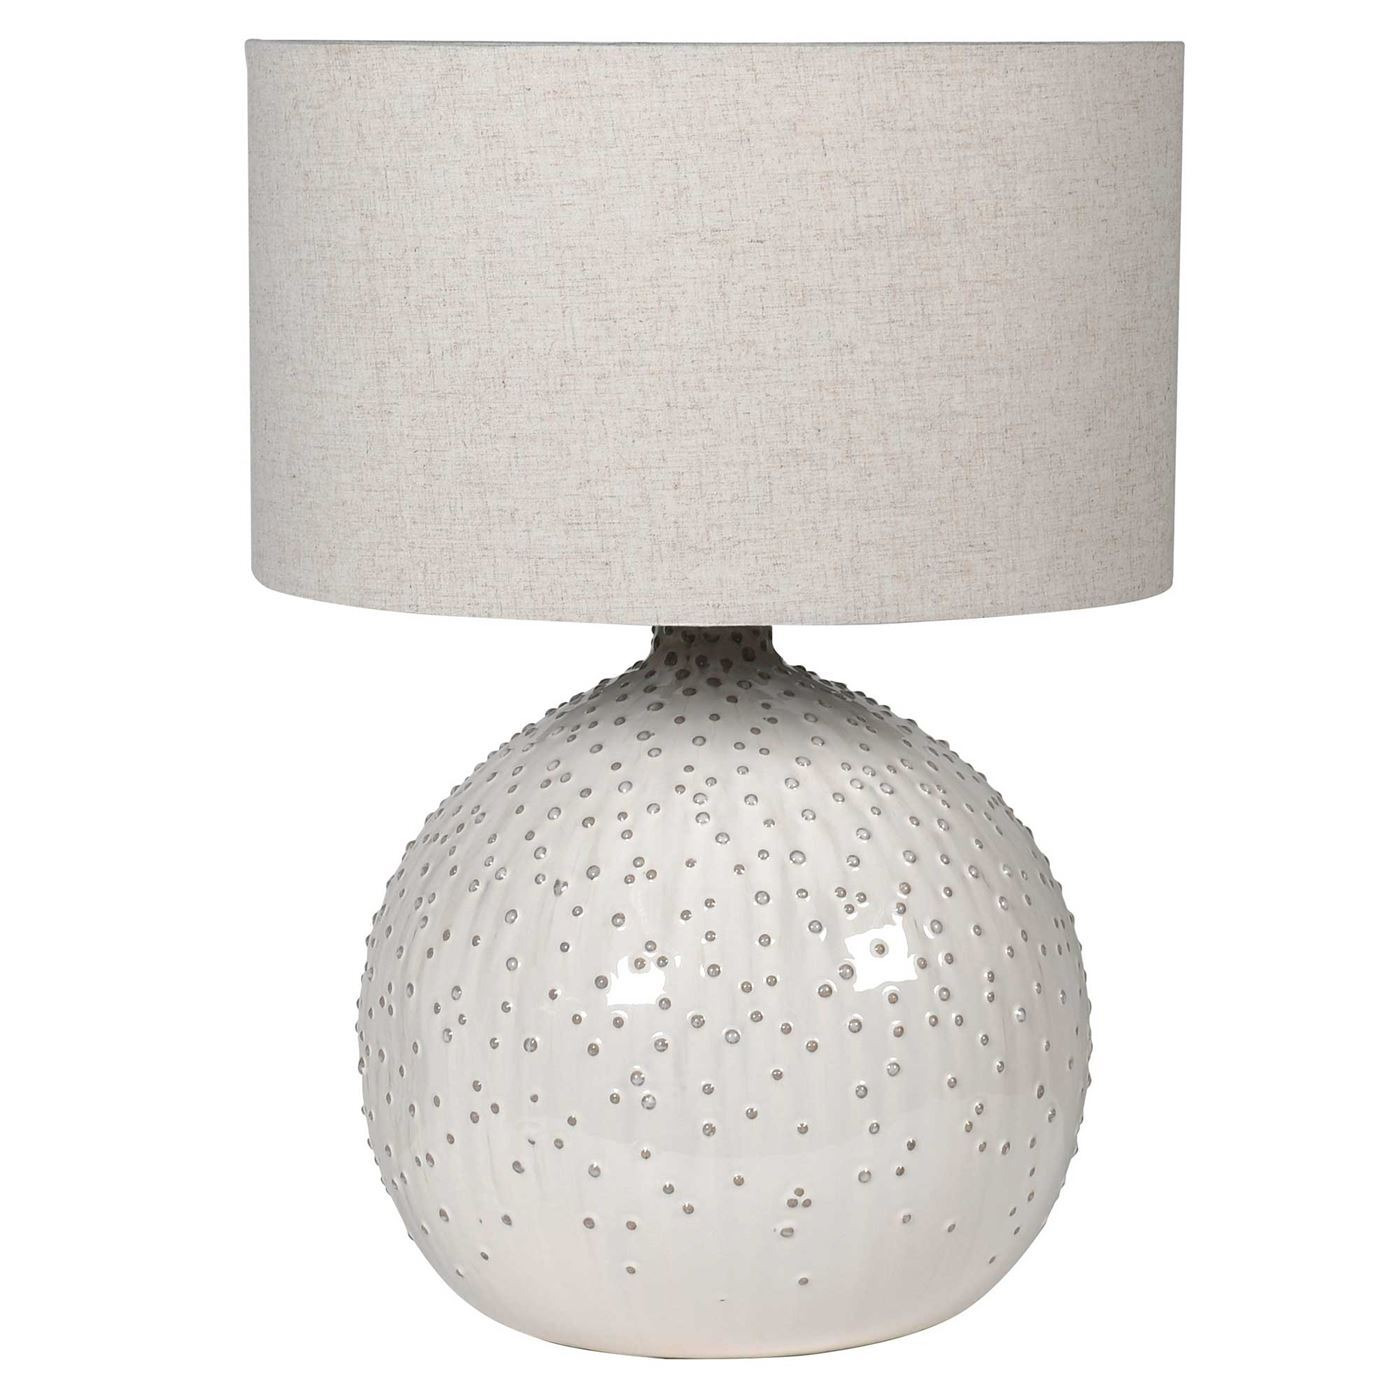 Cream Ceramic Dotted table Lamp - Barker & Stonehouse - image 1